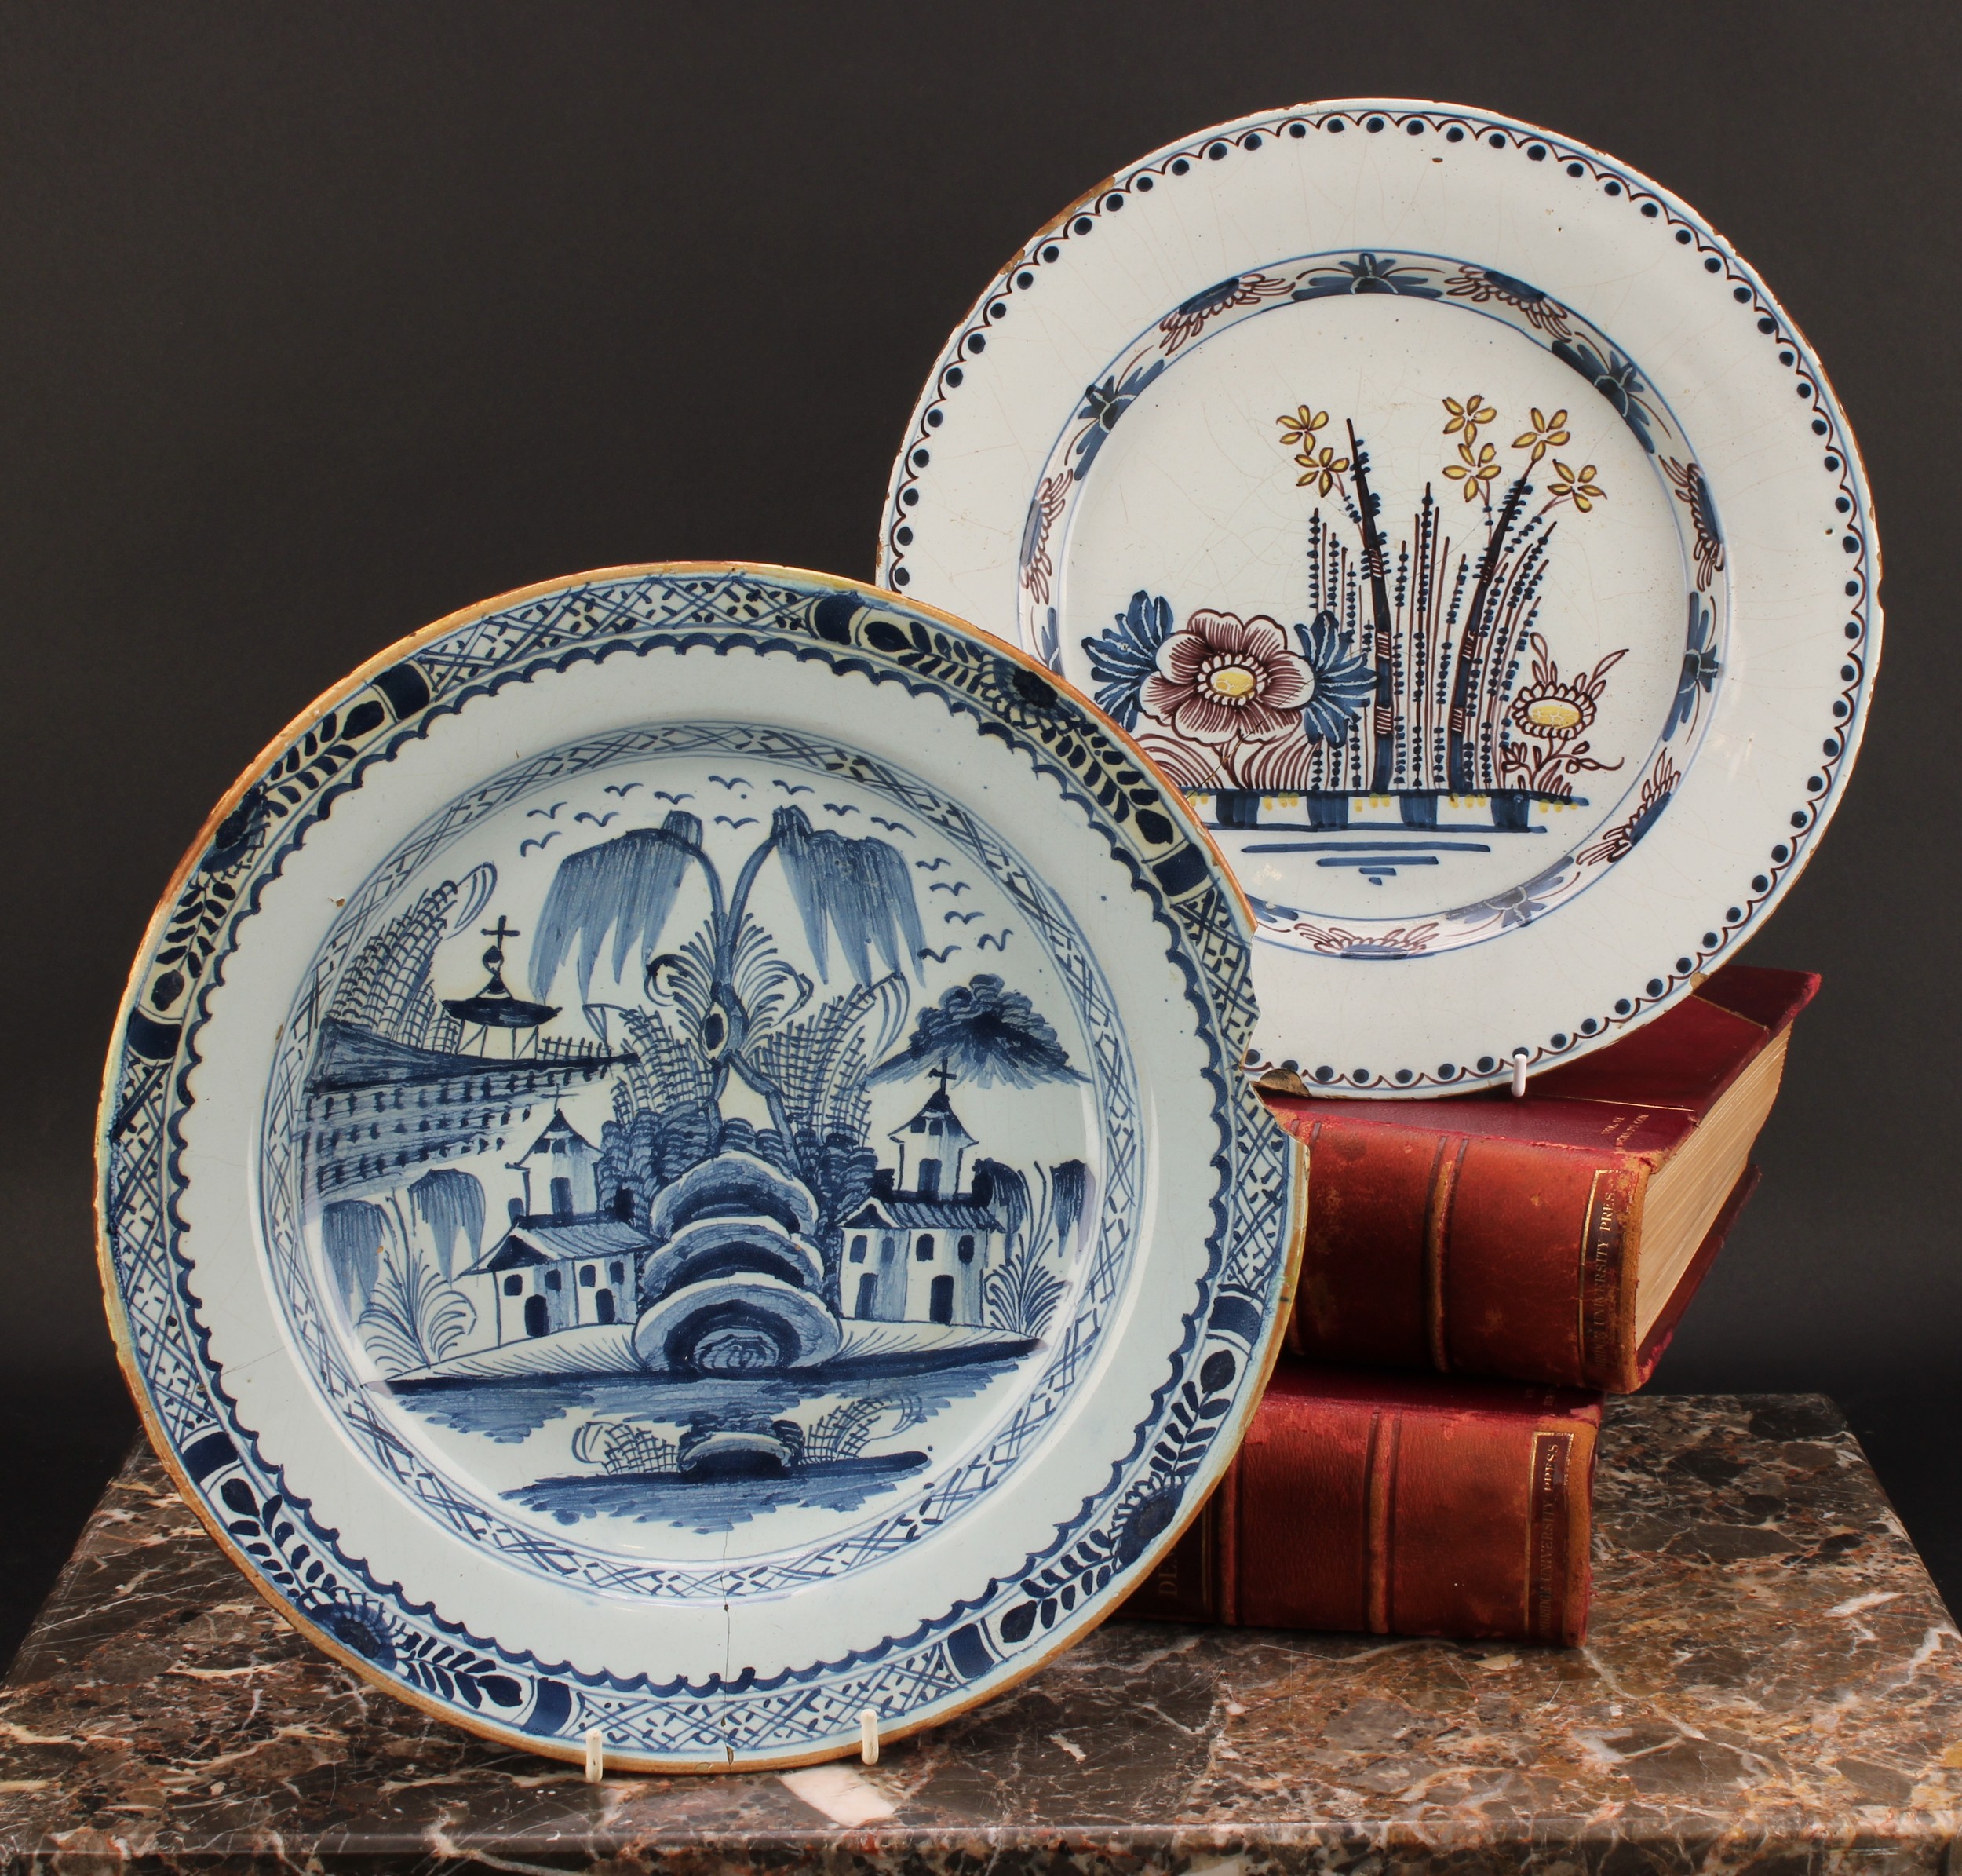 An 18th century English Delft charger, painted in underglaze blue with chinoiserie buildings,